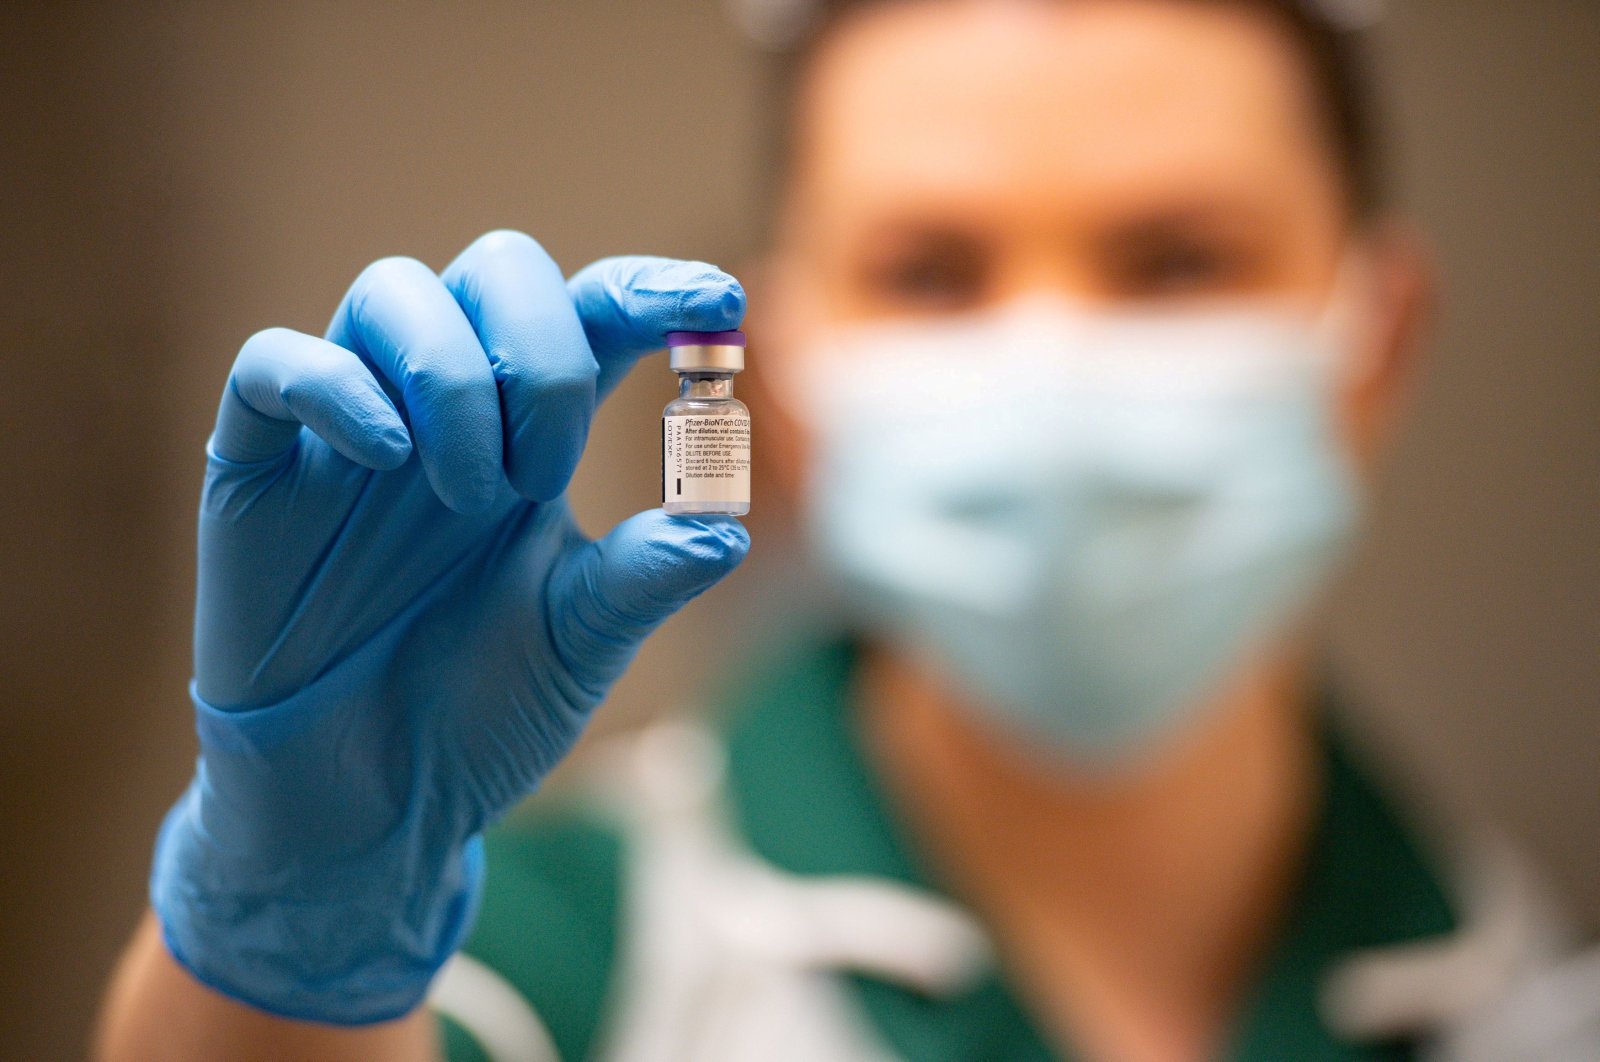 A nurse holds a vial of the Pfizer/BioNTech COVID-19 vaccine at University Hospital, on the first day of the largest immunization program in the British history, in Coventry, Britain December 8, 2020. (Reuters File Photo)